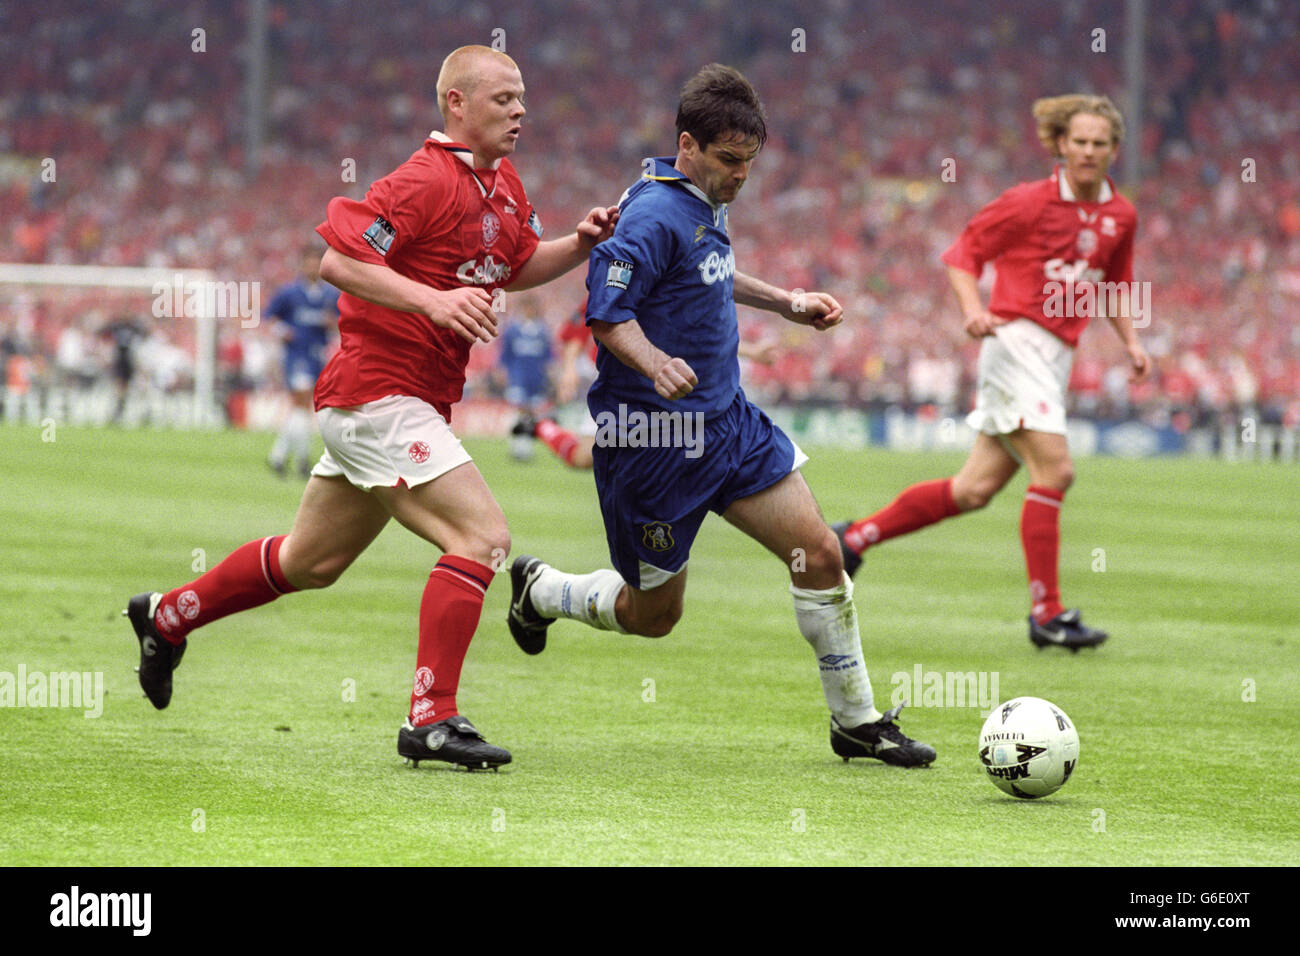 Chelsea's Steve Clarke (r) gets away from Middlesbrough's Phil Stamp (l). In the background for Middlesbrough is Mikkel Beck. Stock Photo